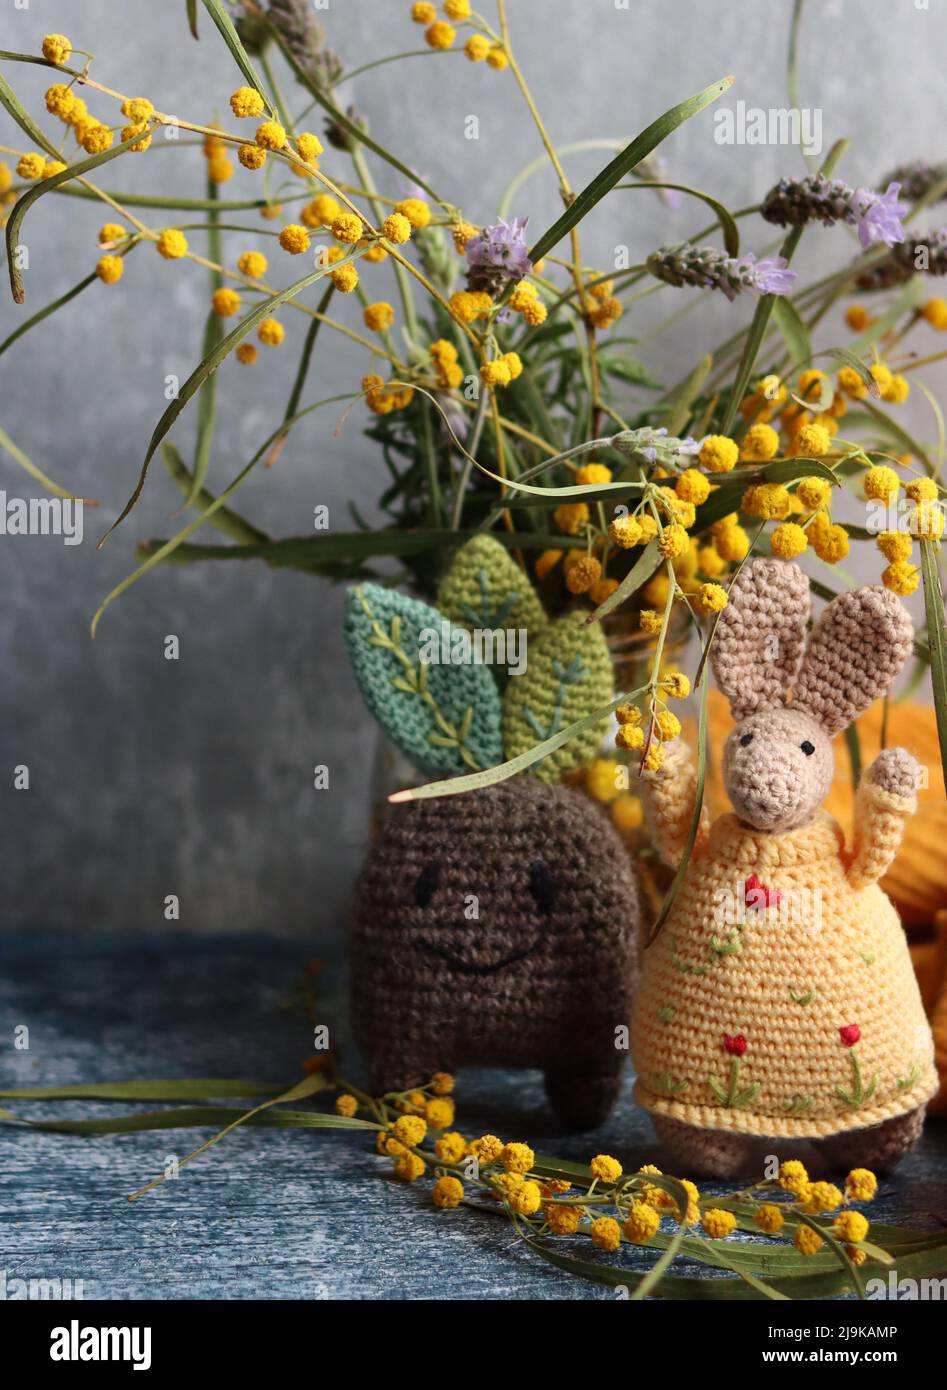 Handmade toys close up. Crochet plant and bunny on grey background. Still life with spring flowers and cute toys. Easter gift ideas. Stock Photo